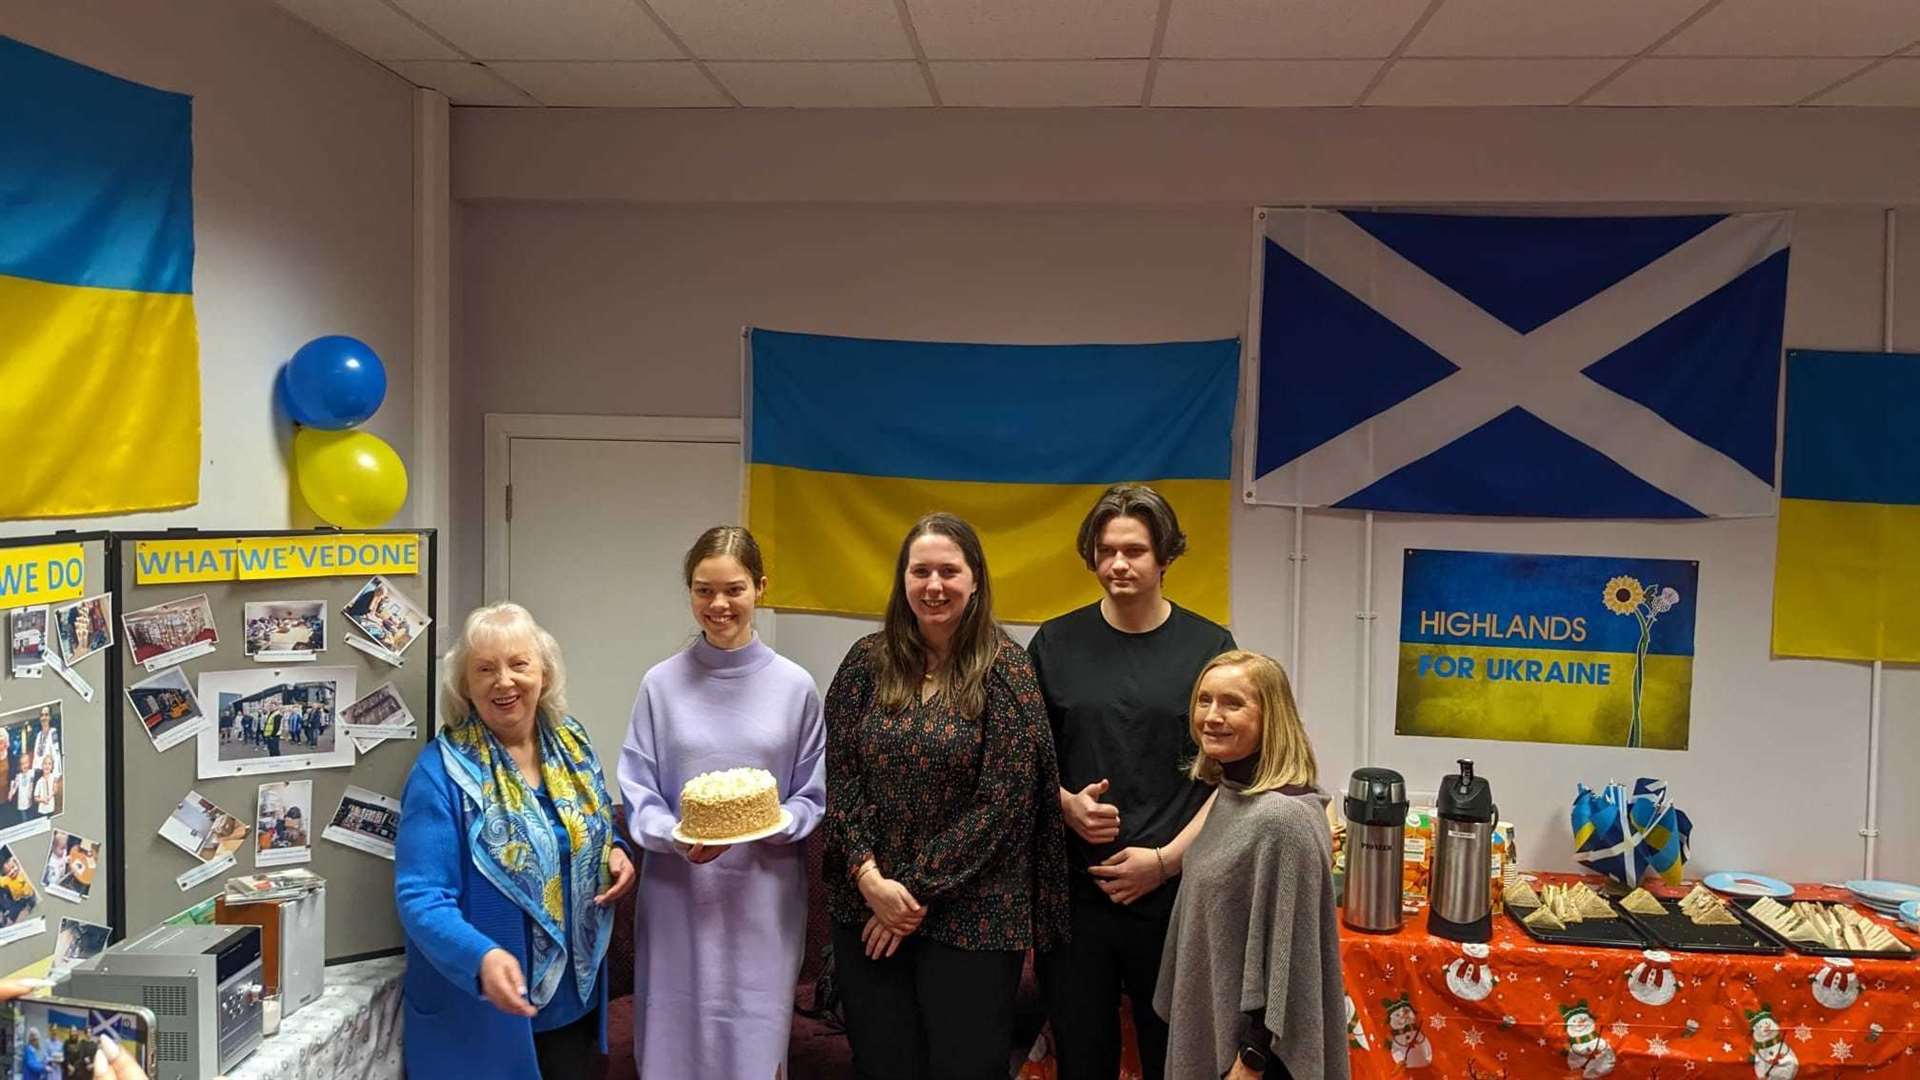 Emma Roddick, Minister for Equalities, Migration and Refugees, (centre) is welcomed to the Ukrainian hub in Inverness.